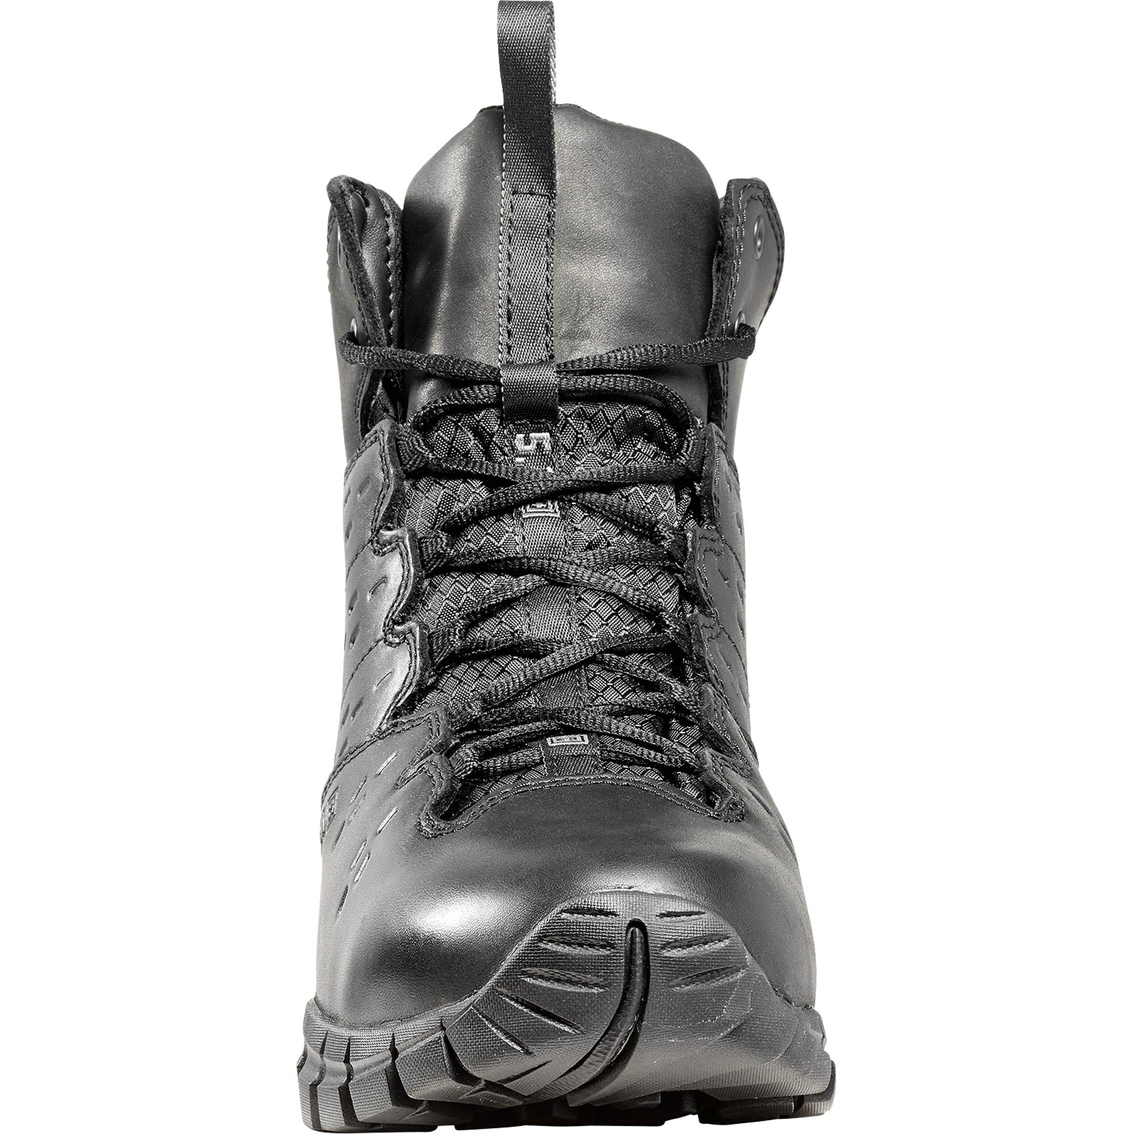 5.11 Men's Xprt 3.0 Black 6 in. Boots - Image 6 of 8